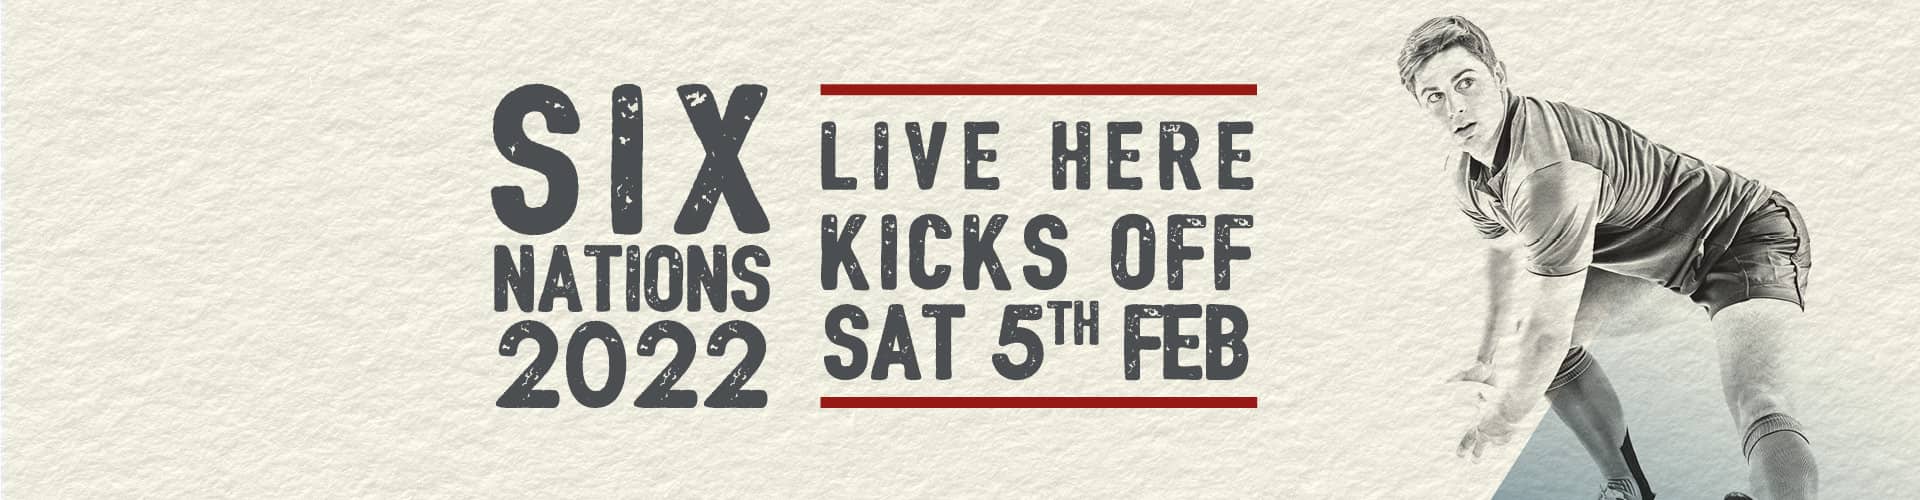 Watch the Six Nations live at Gower Inn